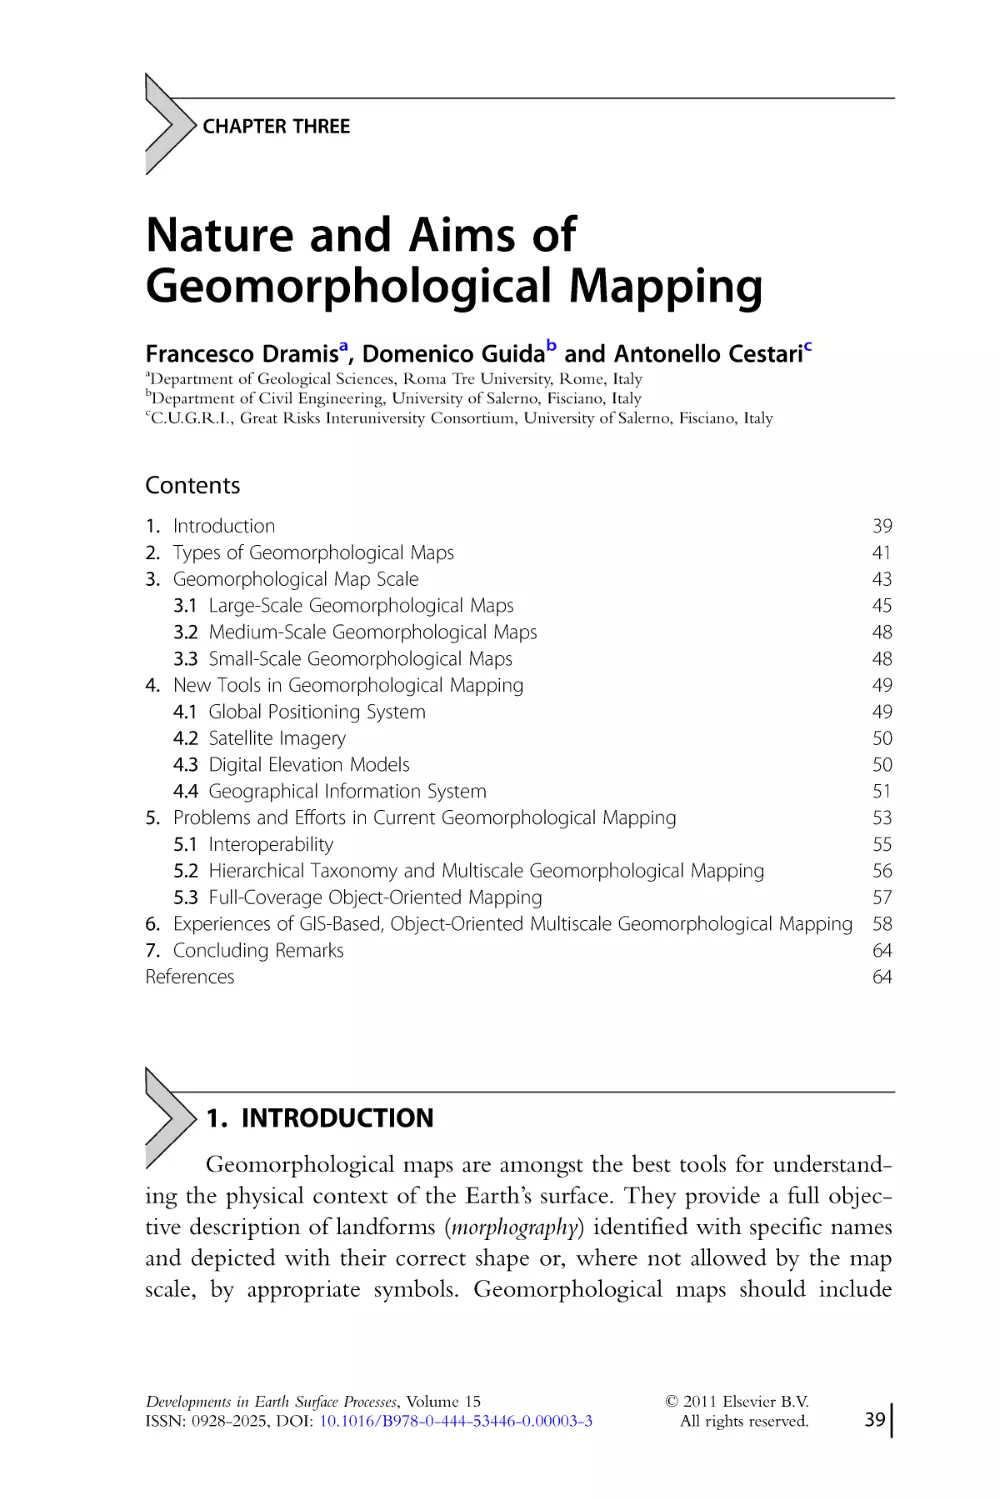 CHAPTER THREE.
Nature and Aims of
Geomorphological Mapping
1. Introduction